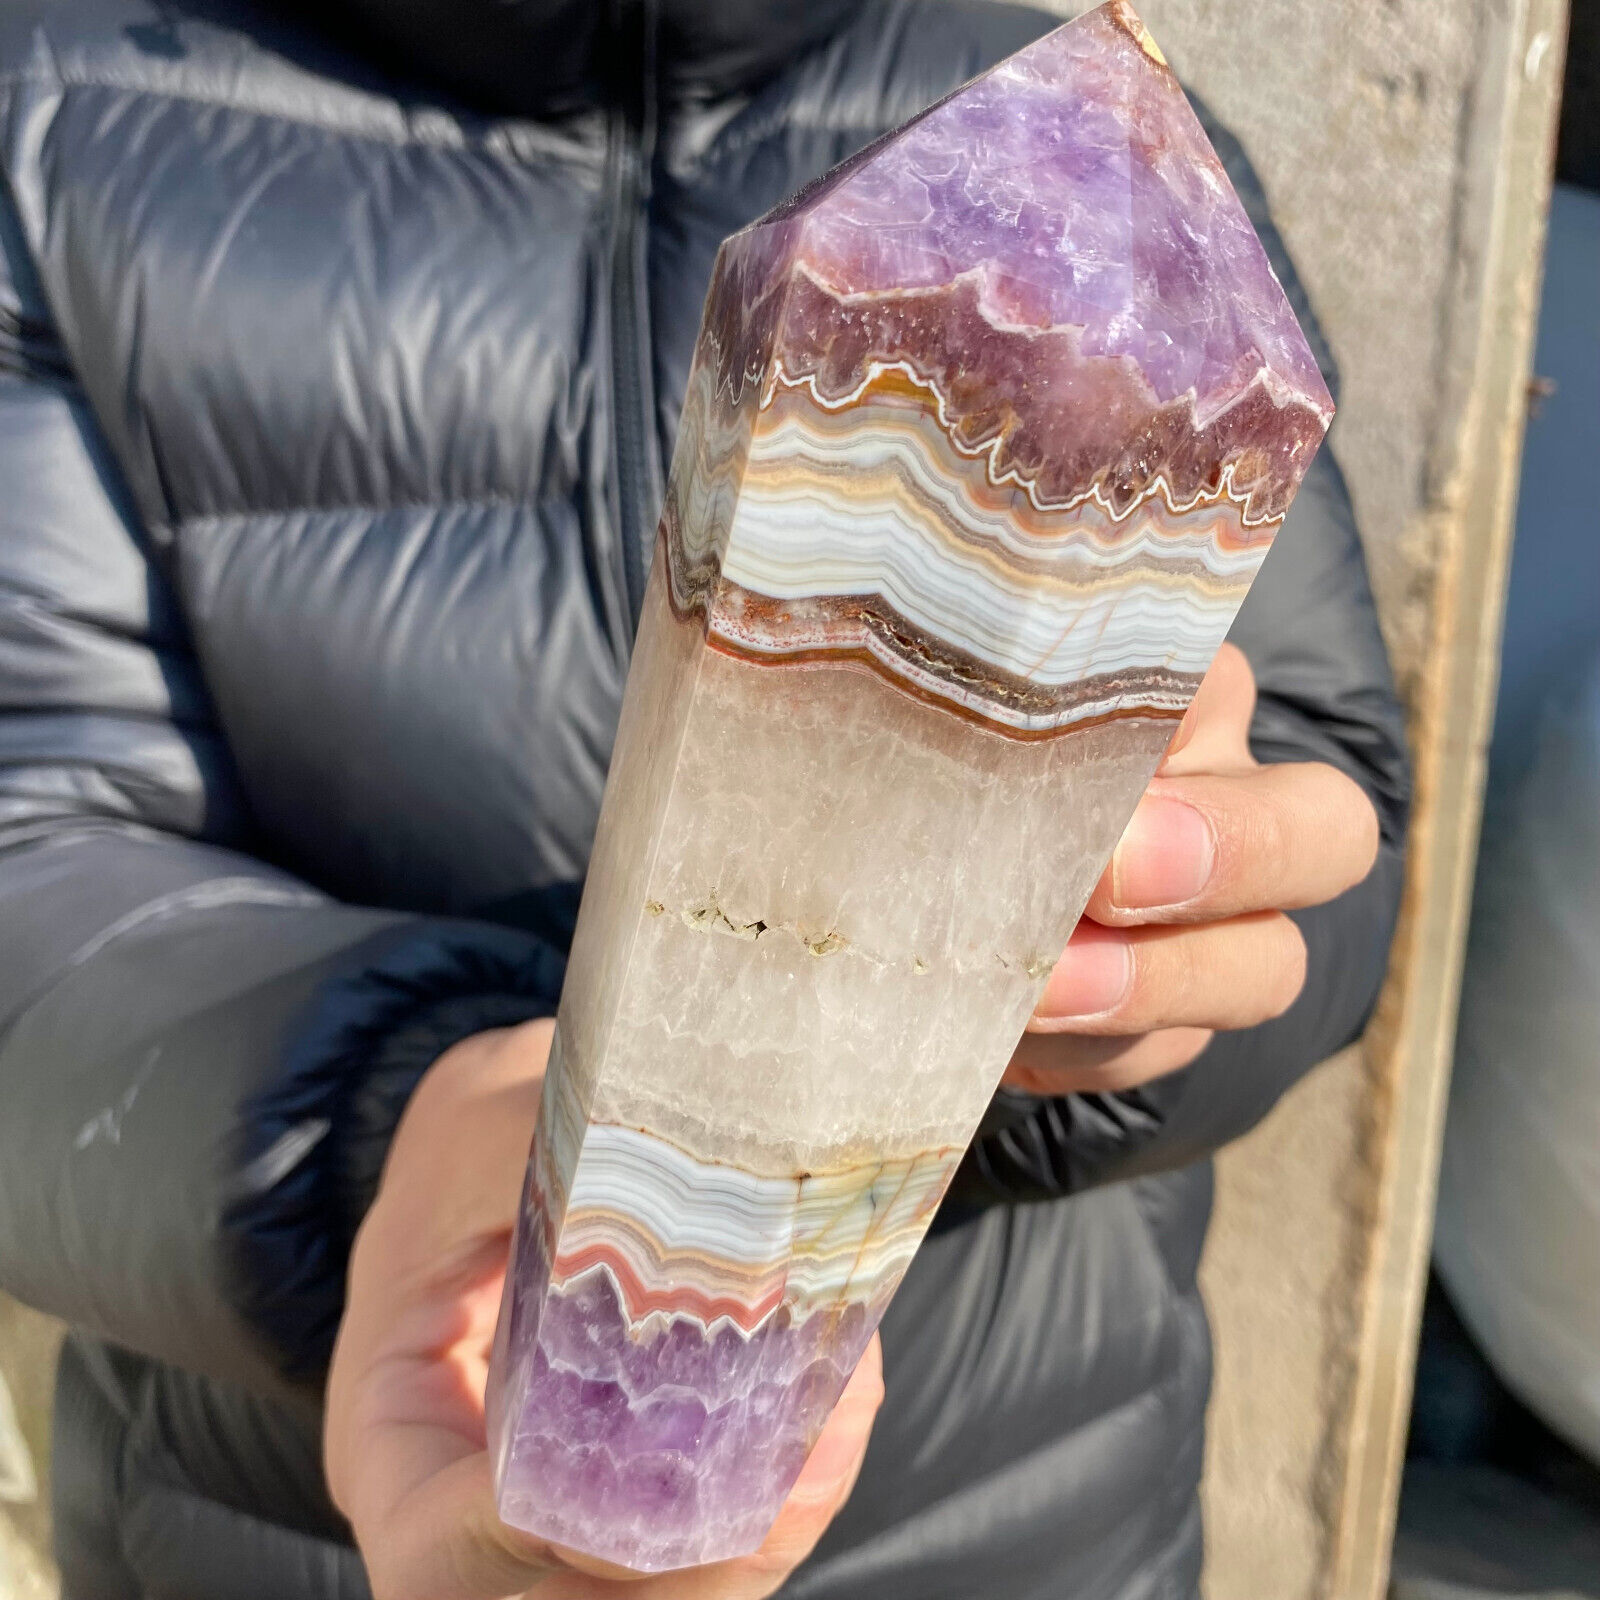 925g Natural Agate Amethyst Scepter Quartz Crystal Wand Point Healing Stone